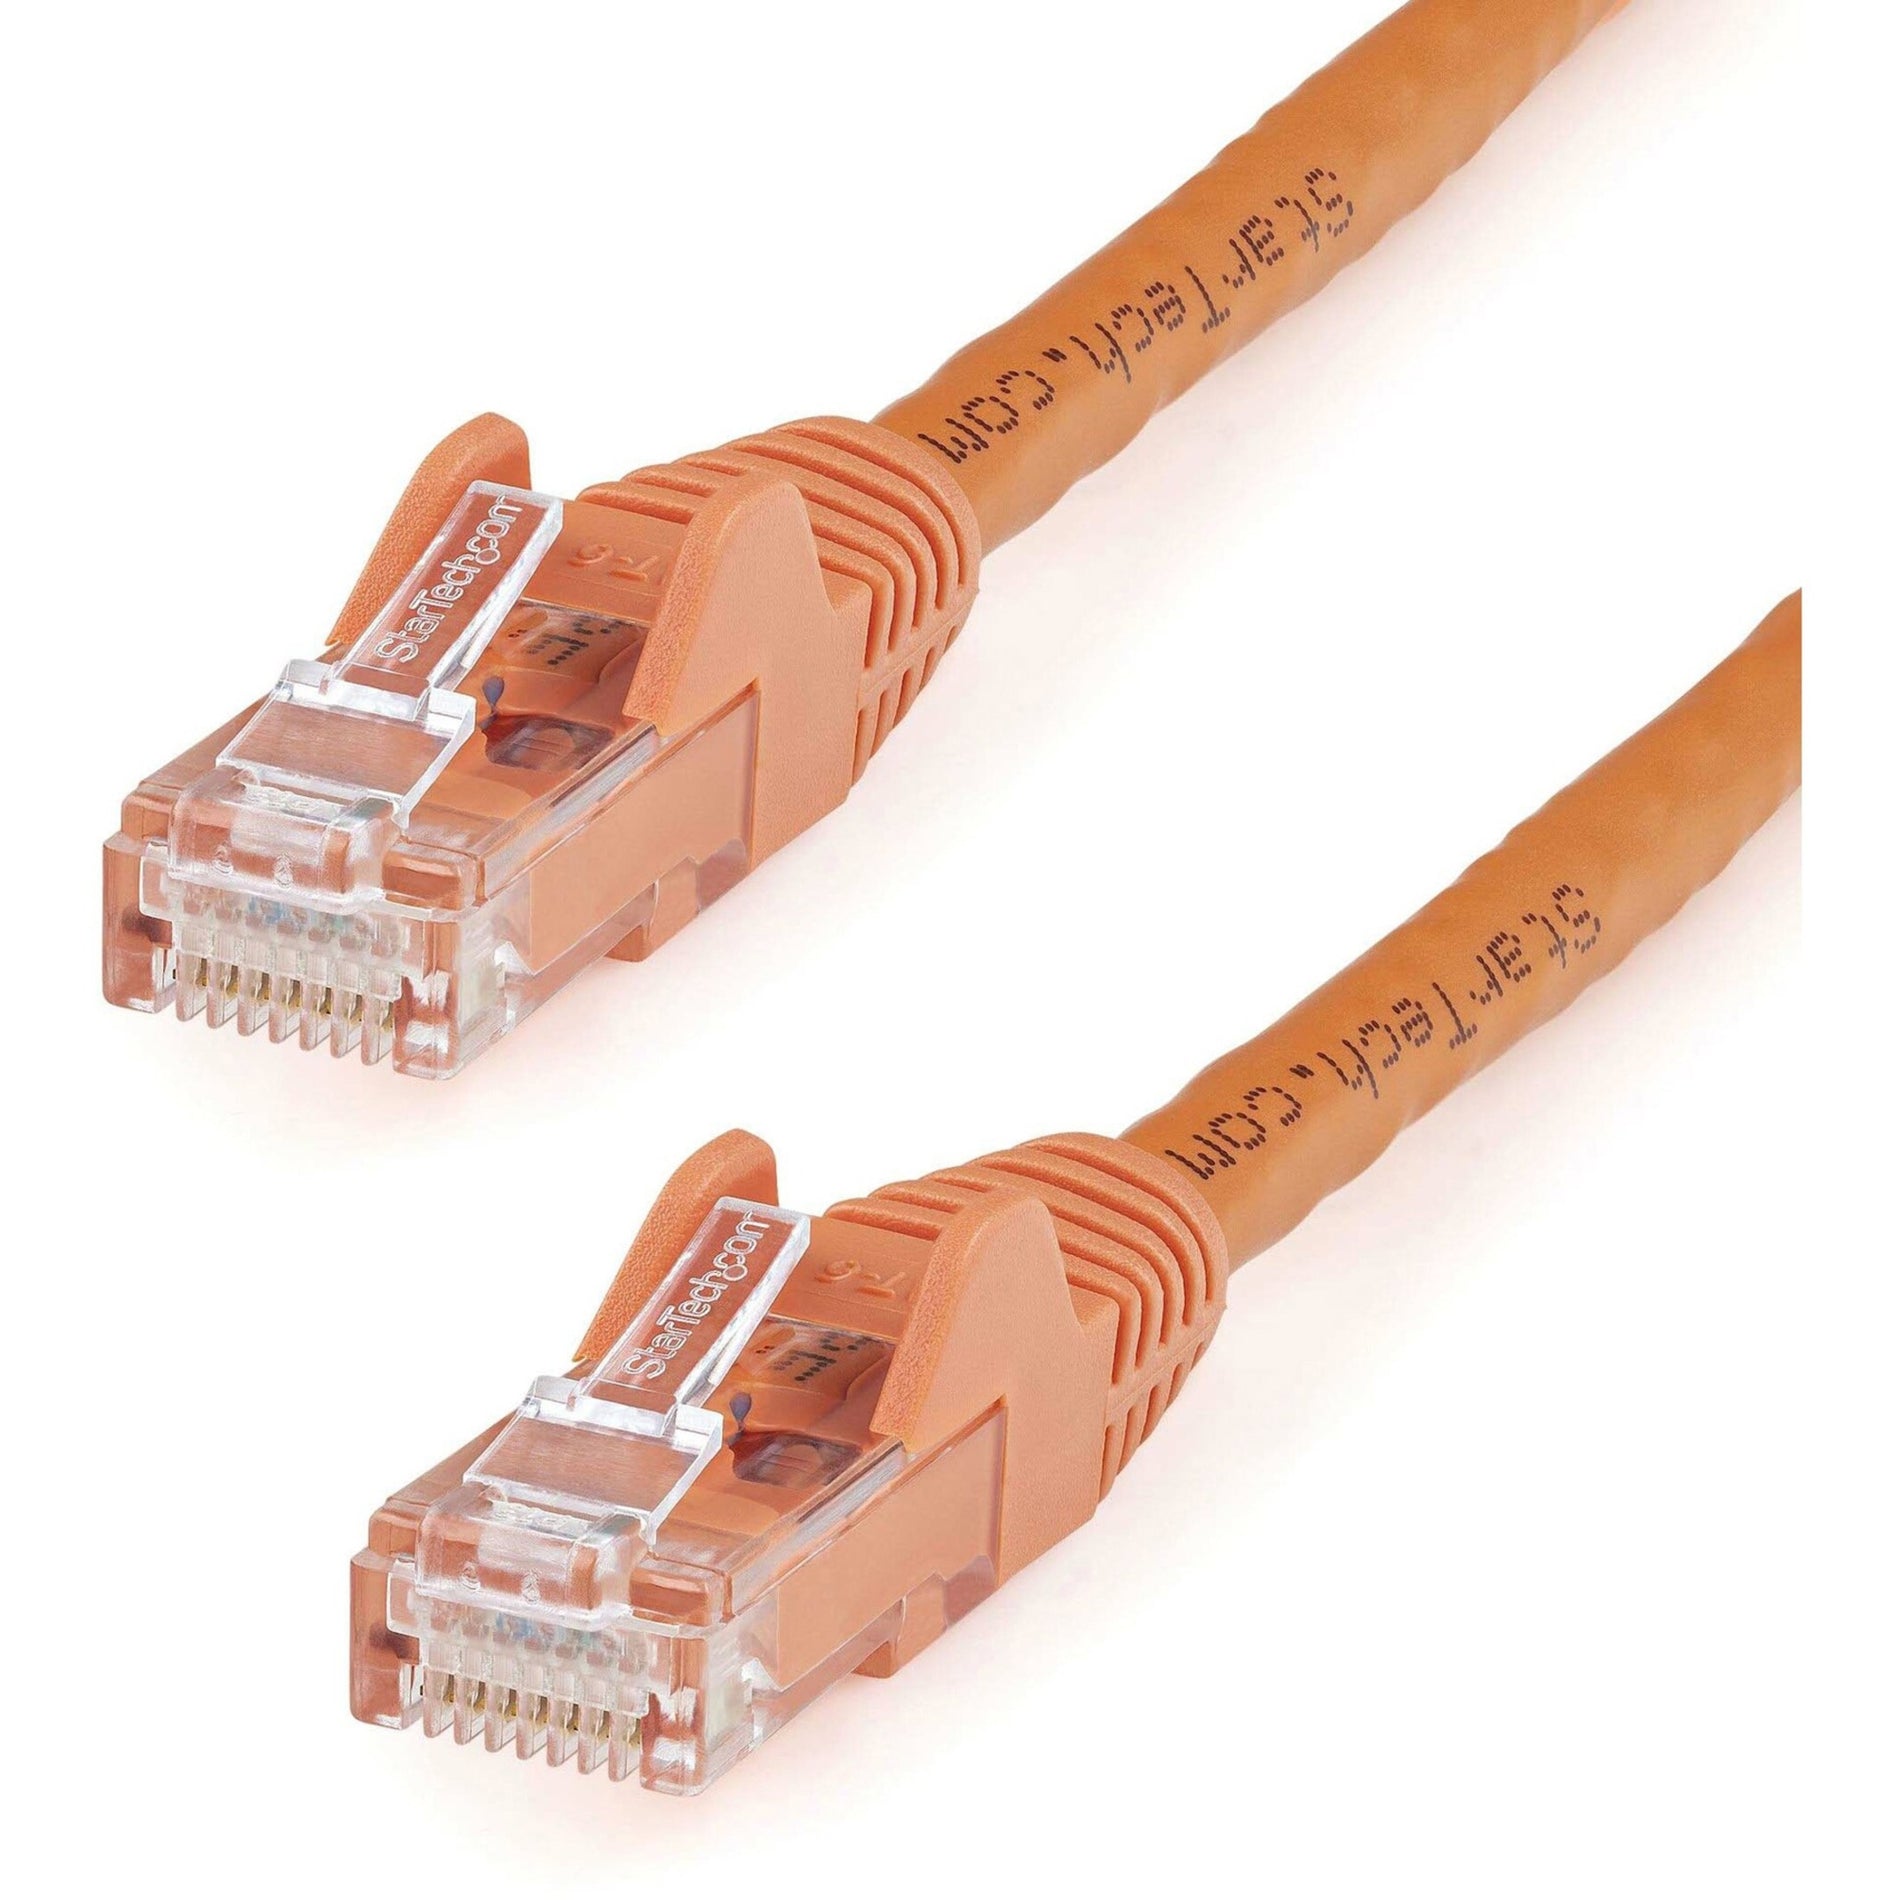 StarTech.com N6PATCH100OR 100 ft Orange Snagless Cat6 UTP Patch Cable, 10 Gbit/s Data Transfer Rate, Strain Relief